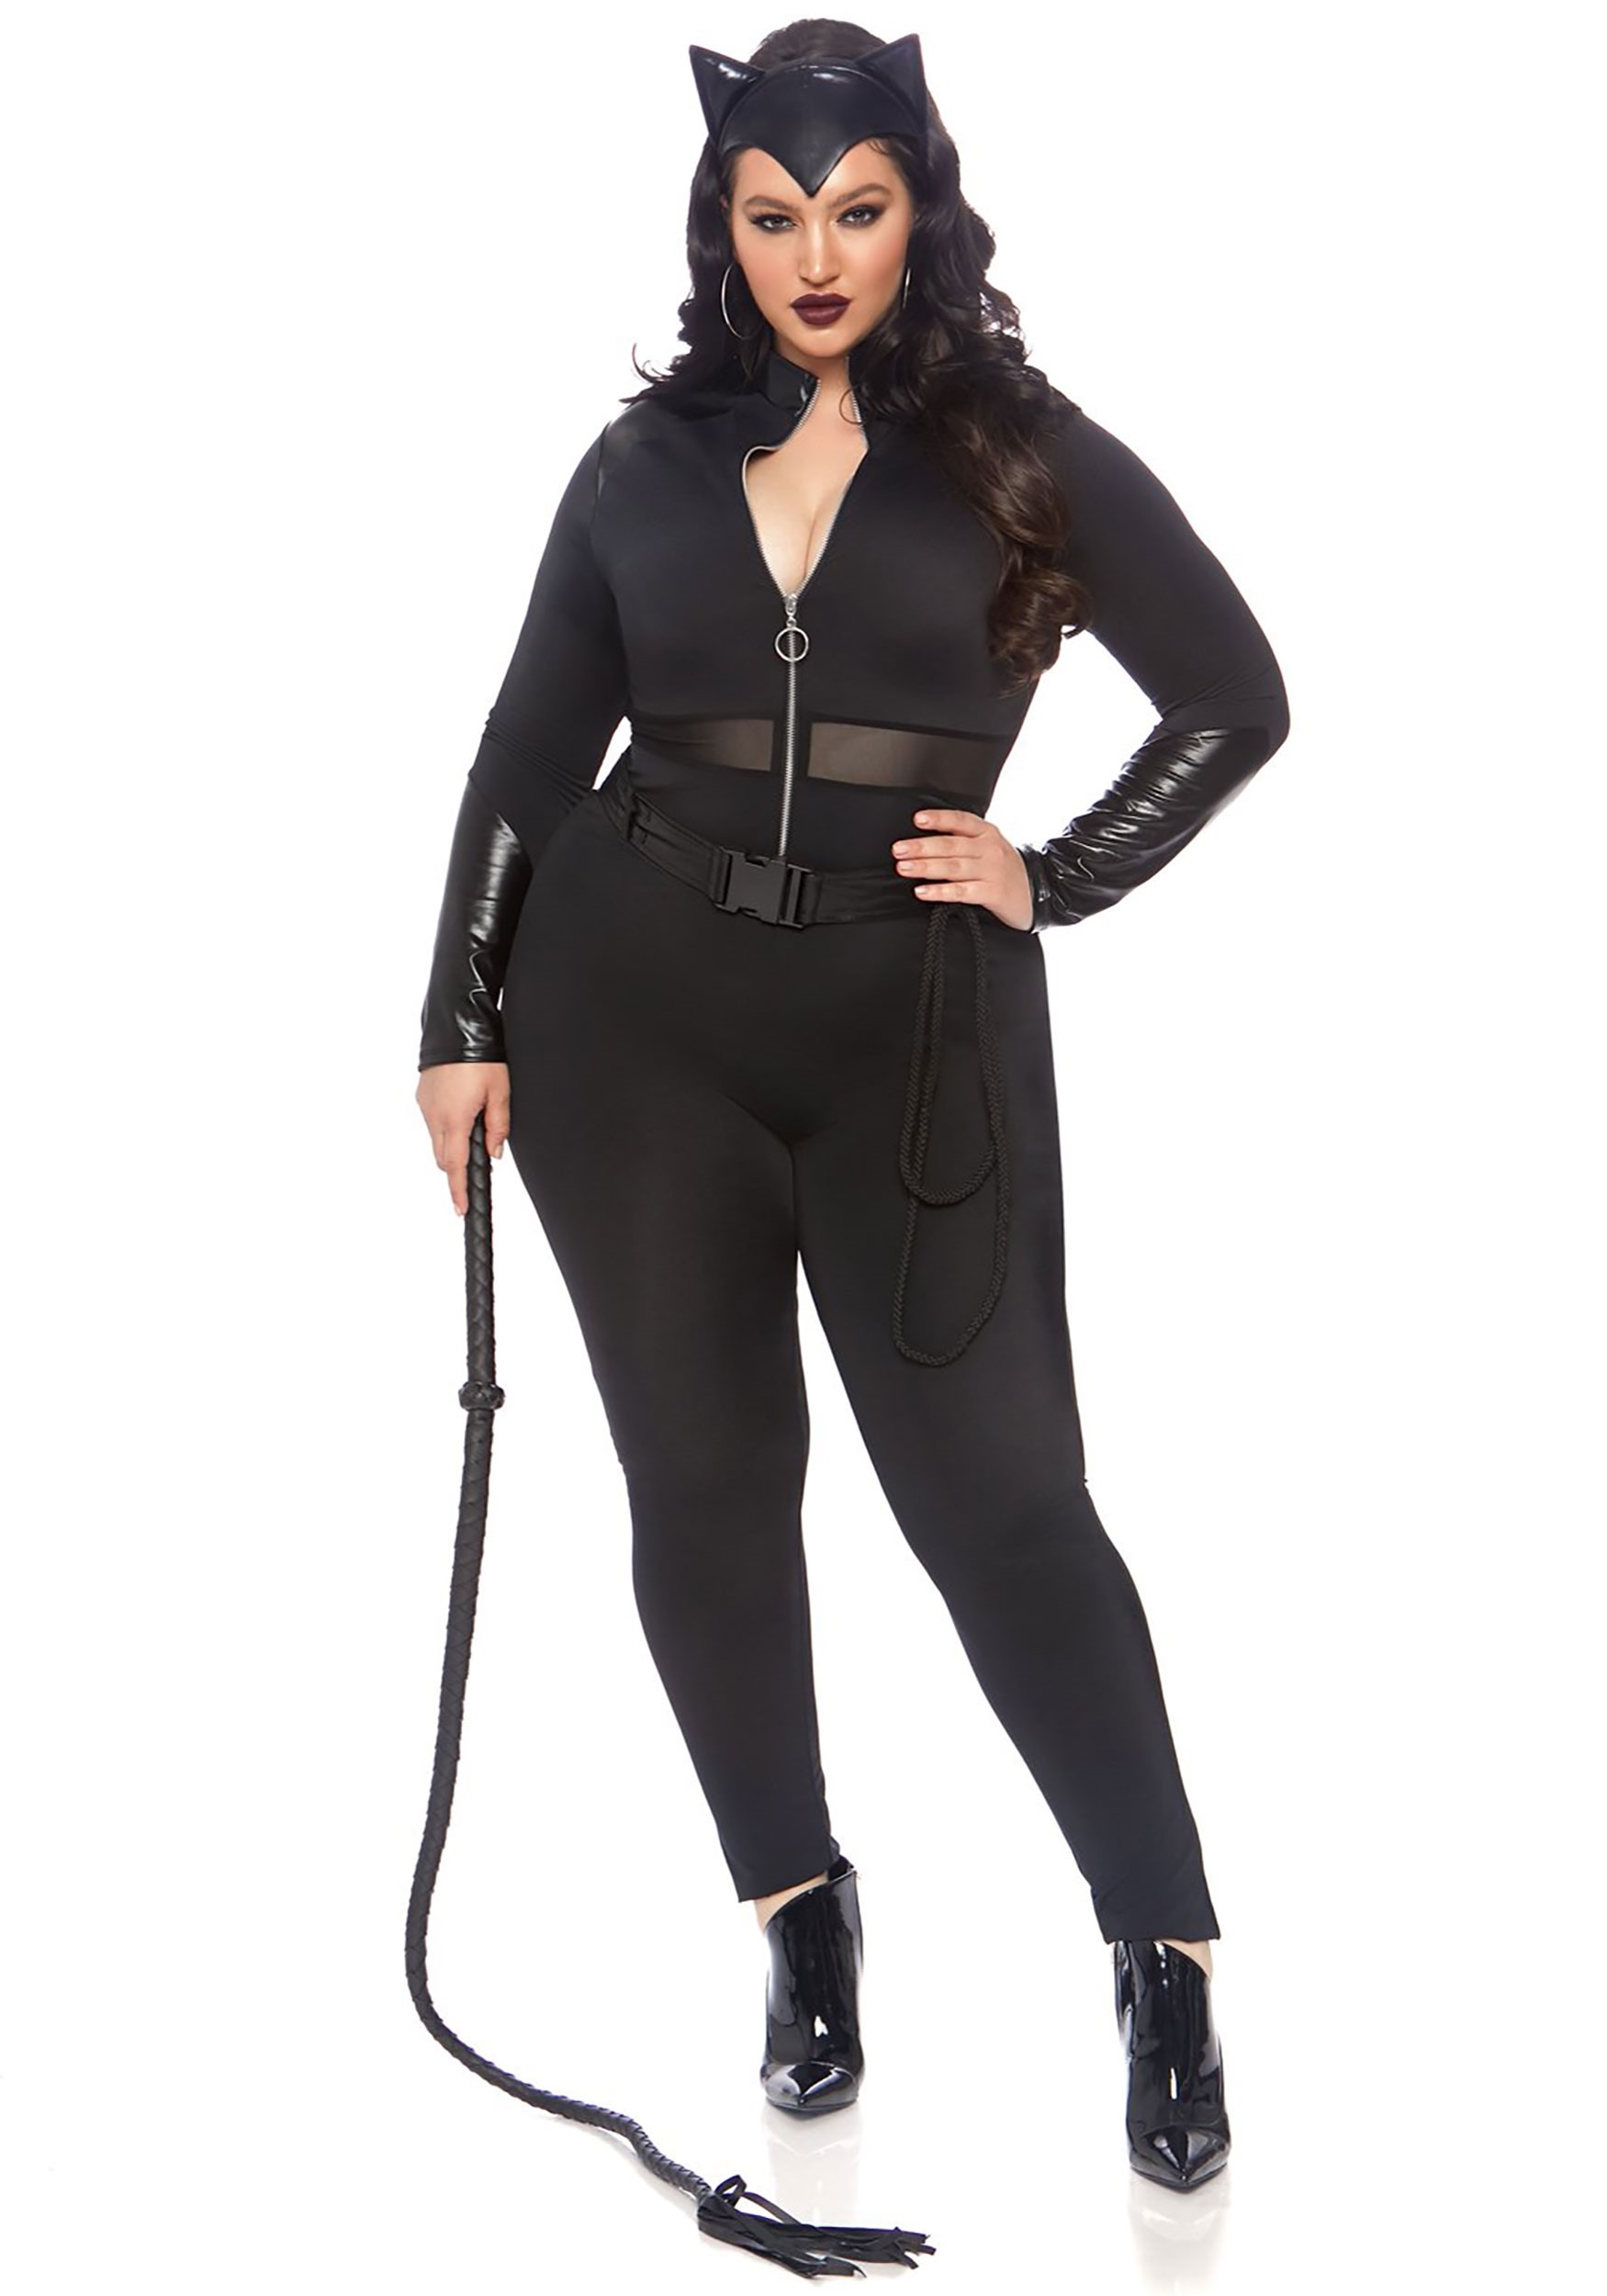 Plus Size Sultry Supervillain Women's Costume